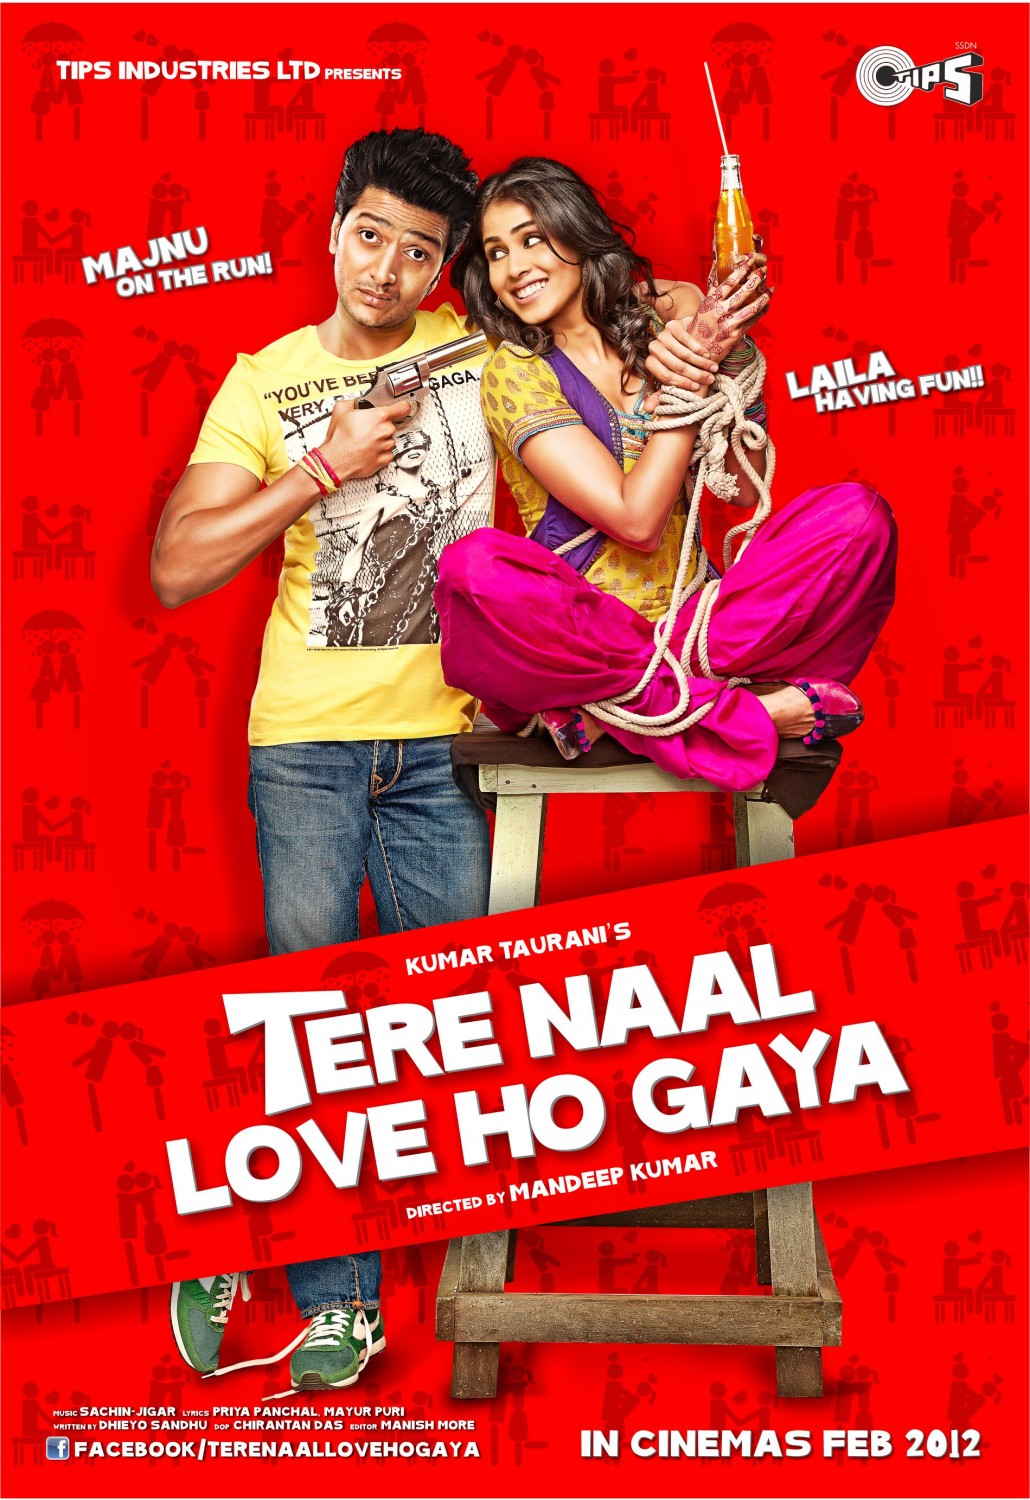 Extra Large Movie Poster Image for Tere Naal Love Ho Gaya (#2 of 5)